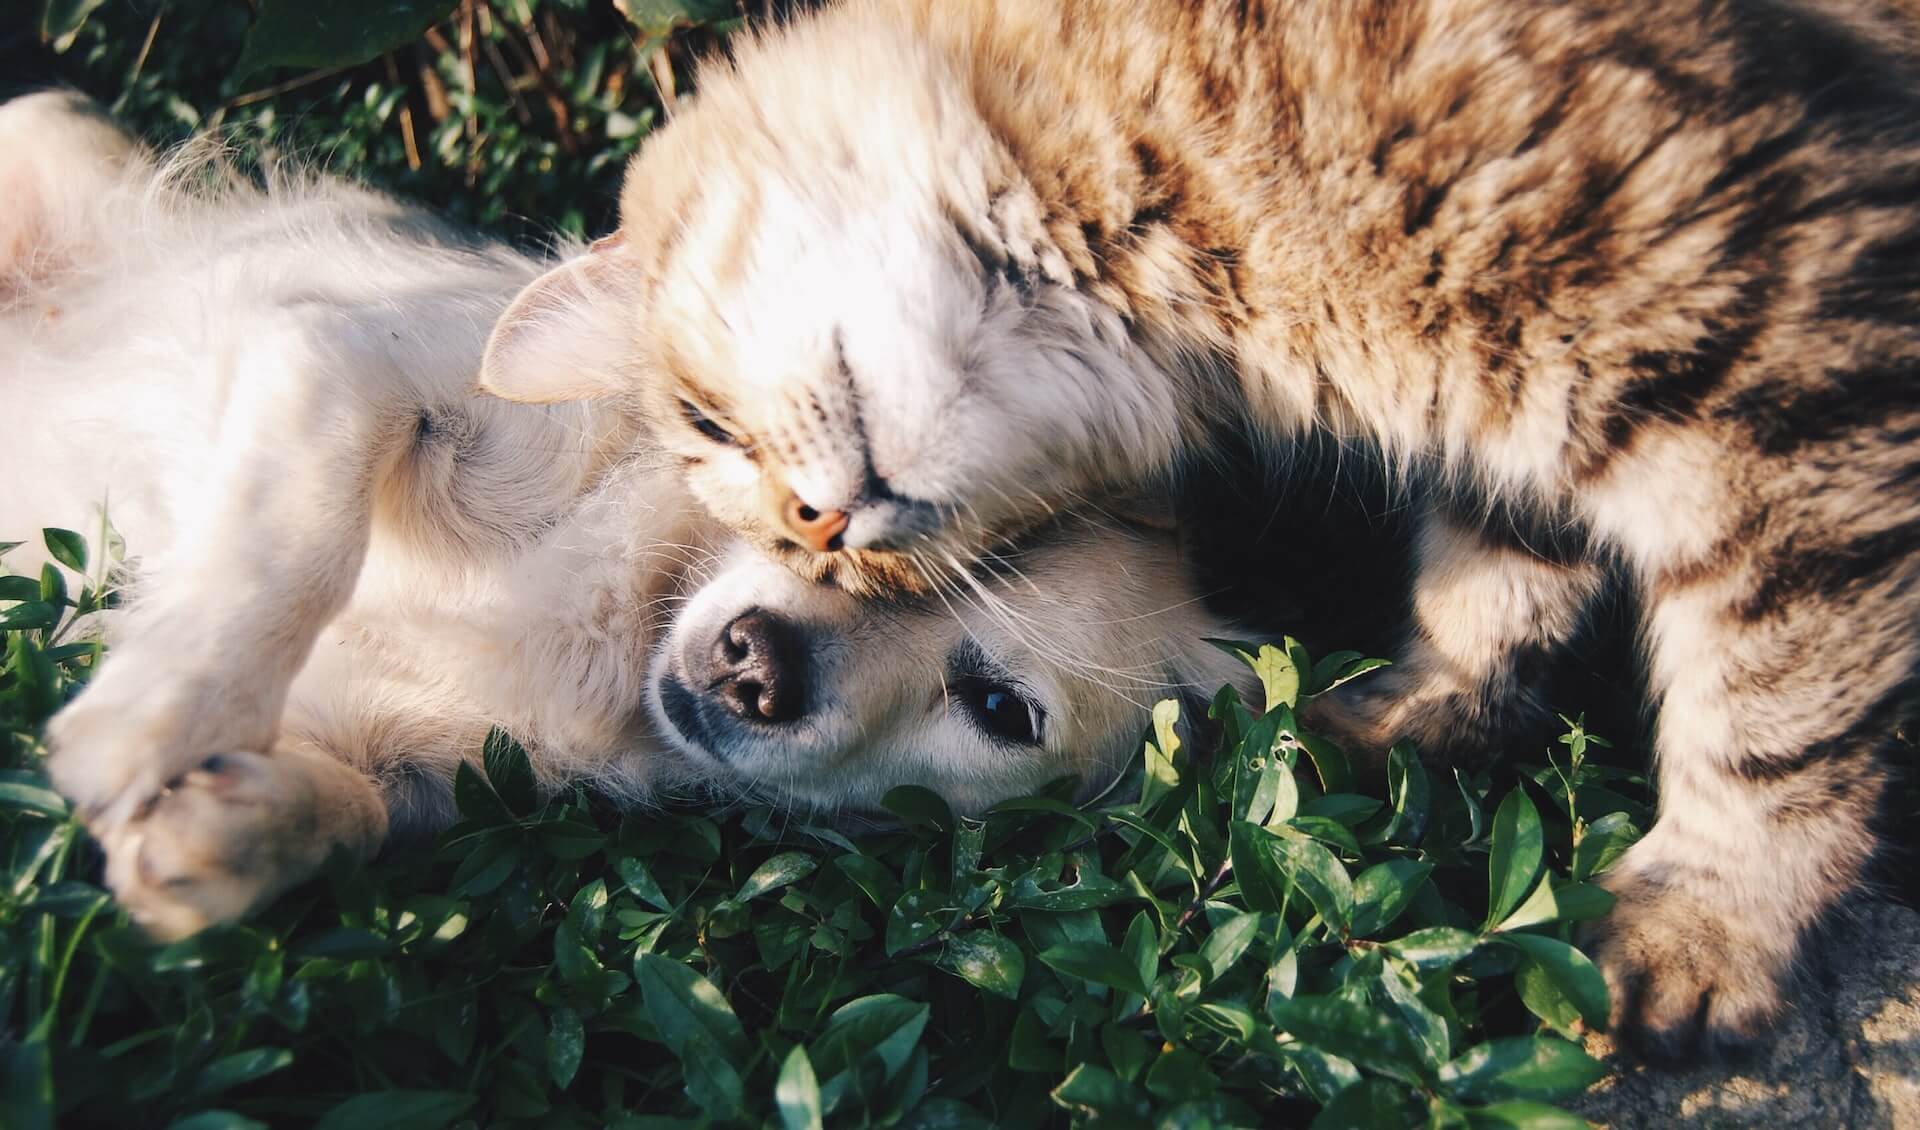 Cat and dog playing outside.